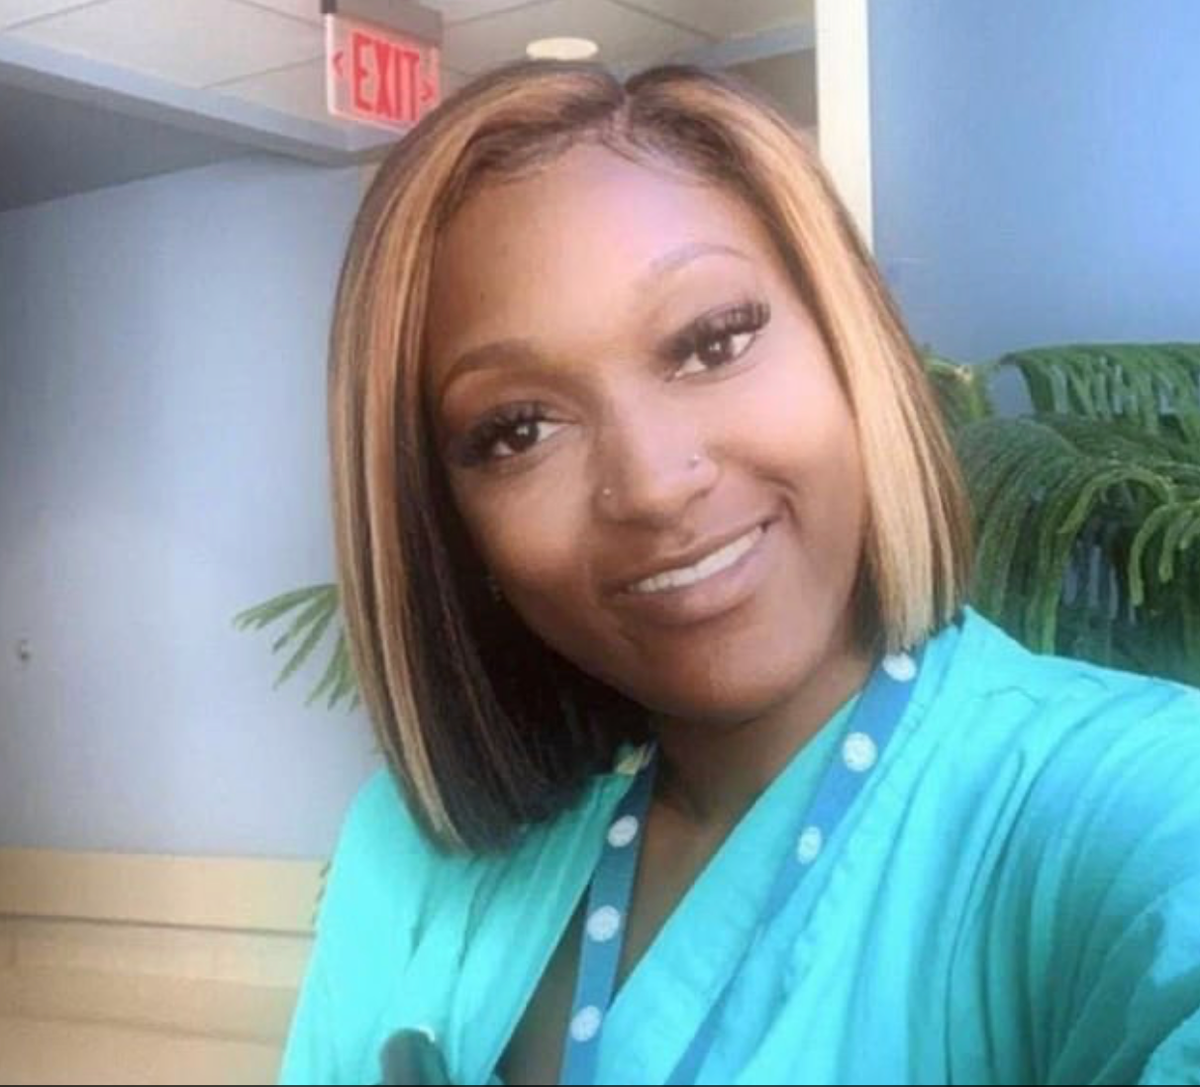 A sickening video, a mysterious death: What really happened to Shanquella Robinson?